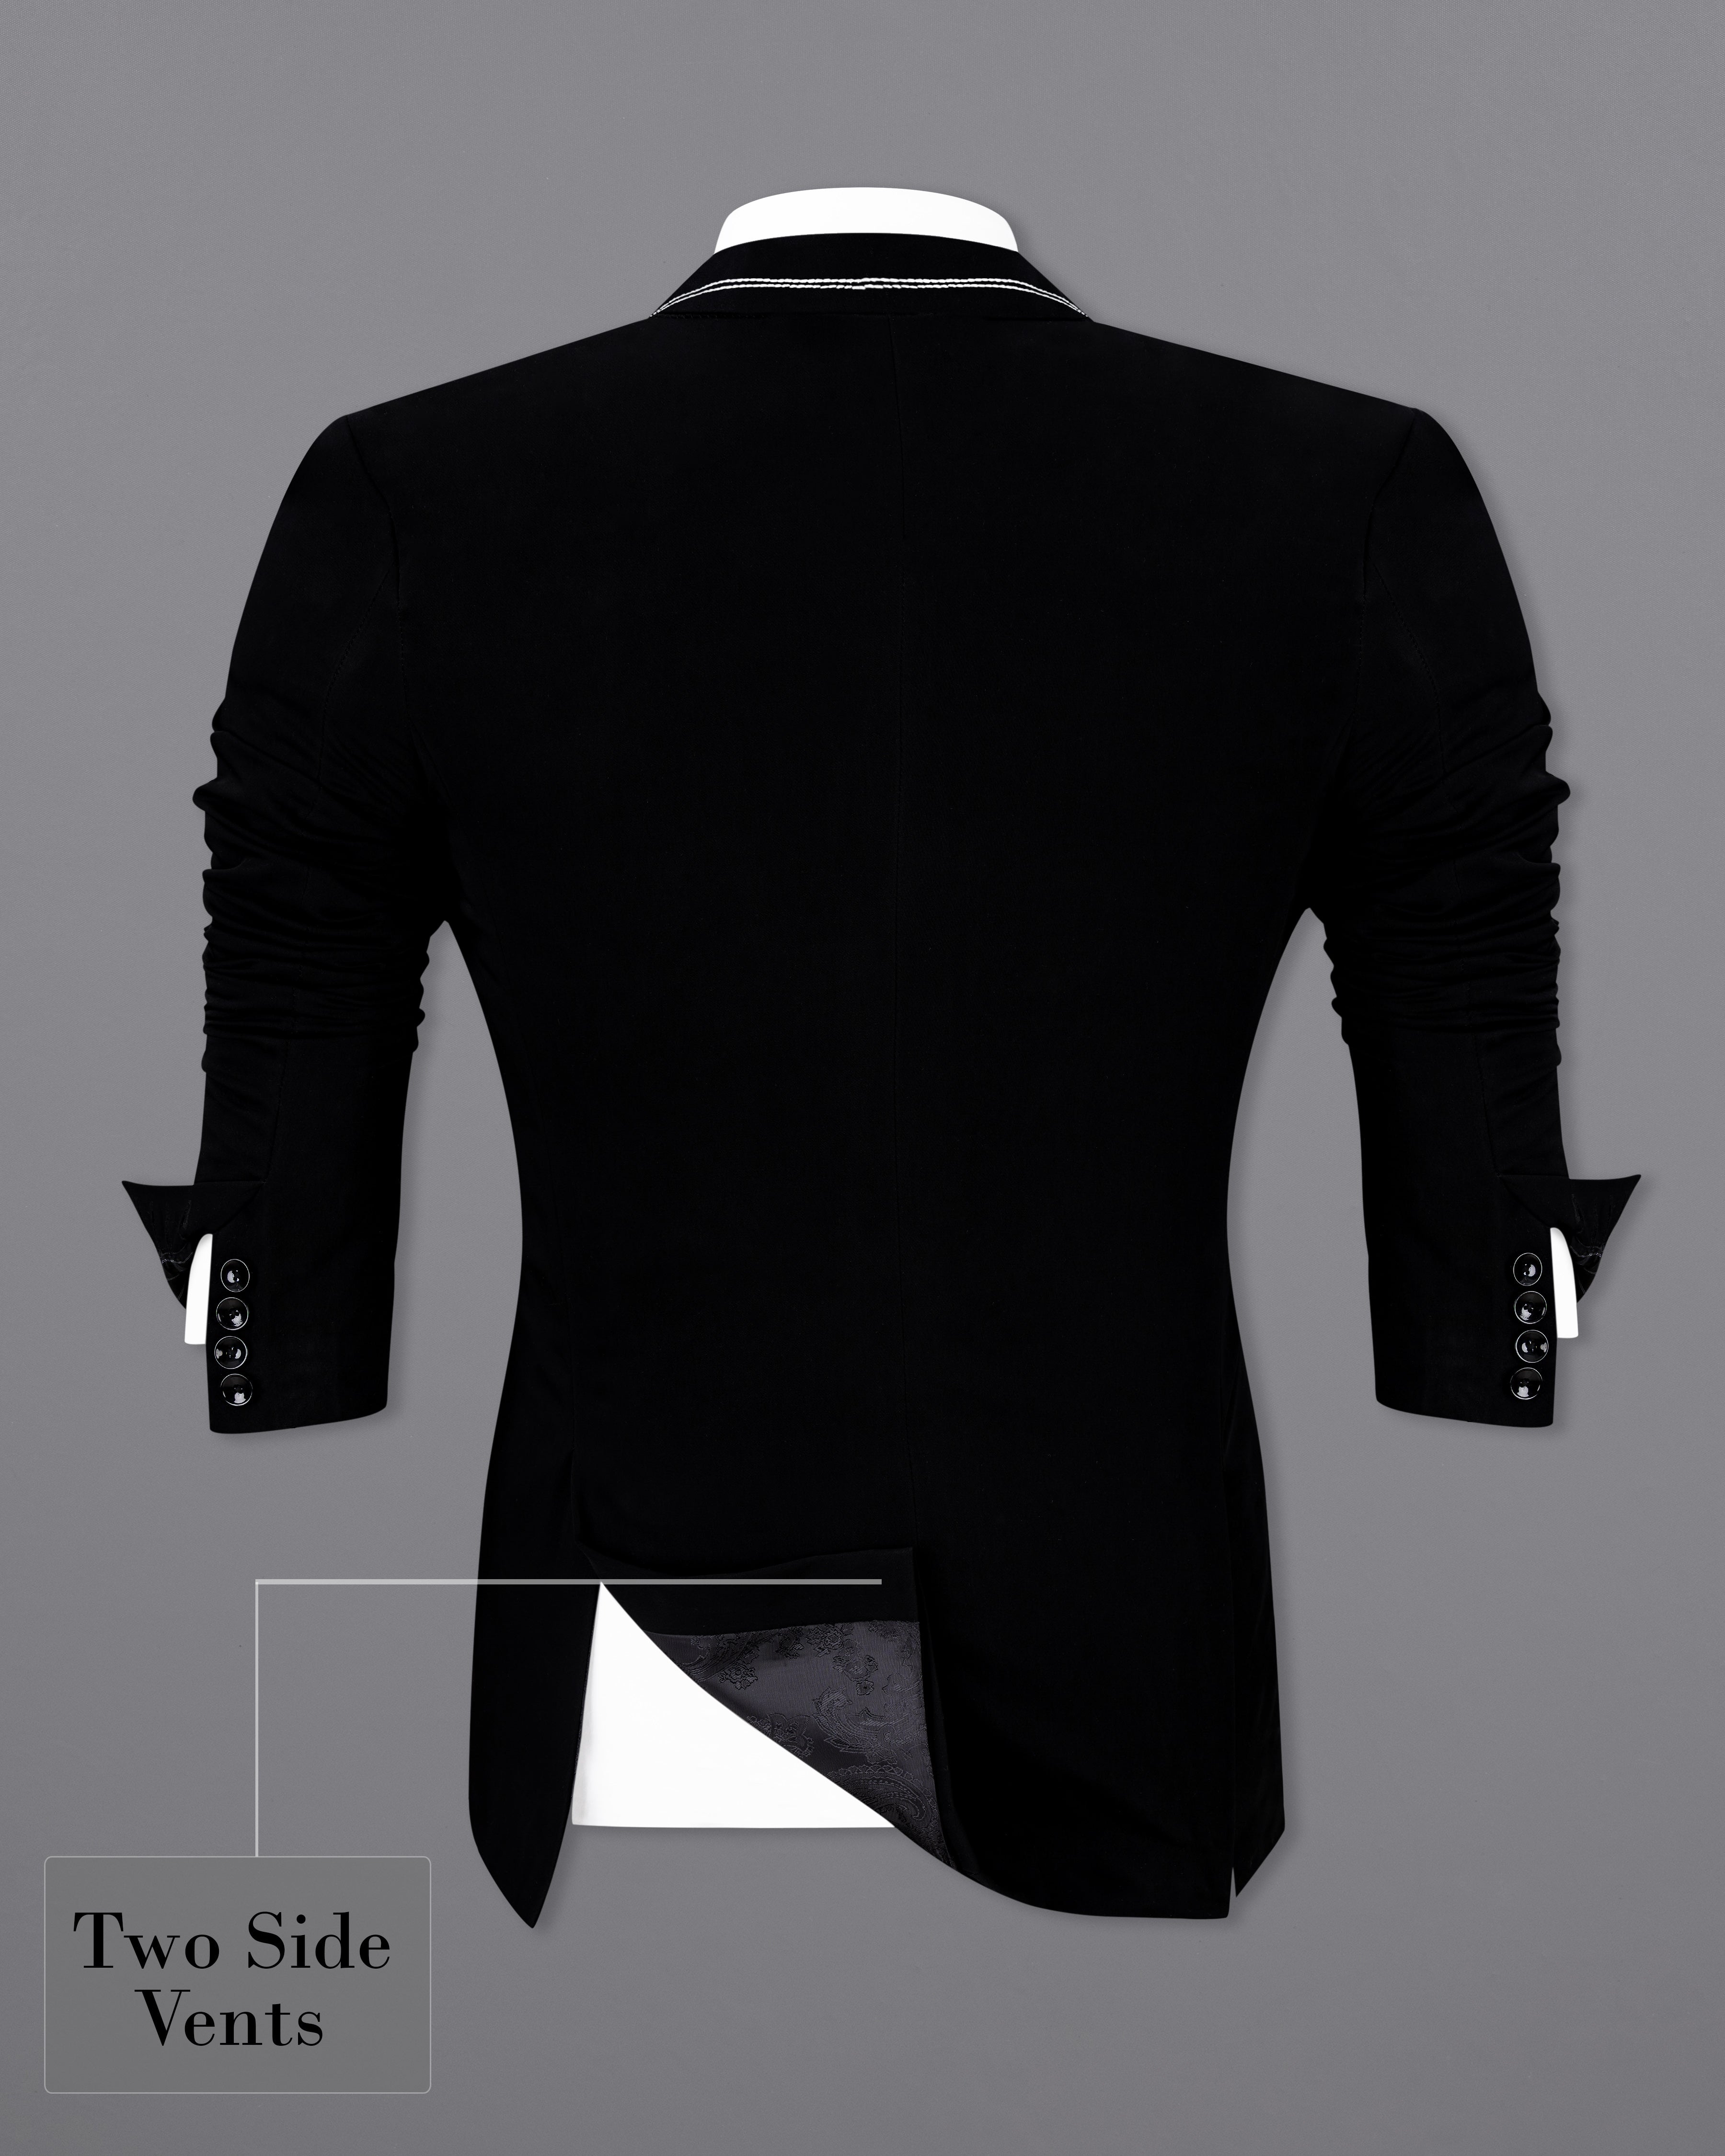 Korean  Black (The Best Black On This Planet) Embroidered Single Breasted Designer Signature Blazer BL2561-SB-PP-D244-36, BL2561-SB-PP-D244-38, BL2561-SB-PP-D244-40, BL2561-SB-PP-D244-42, BL2561-SB-PP-D244-44, BL2561-SB-PP-D244-46, BL2561-SB-PP-D244-48, BL2561-SB-PP-D244-50,, BL2561-SB-PP-D244-52, BL2561-SB-PP-D244-54, BL2561-SB-PP-D244-56, BL2561-SB-PP-D244-58, BL2561-SB-PP-D244-60